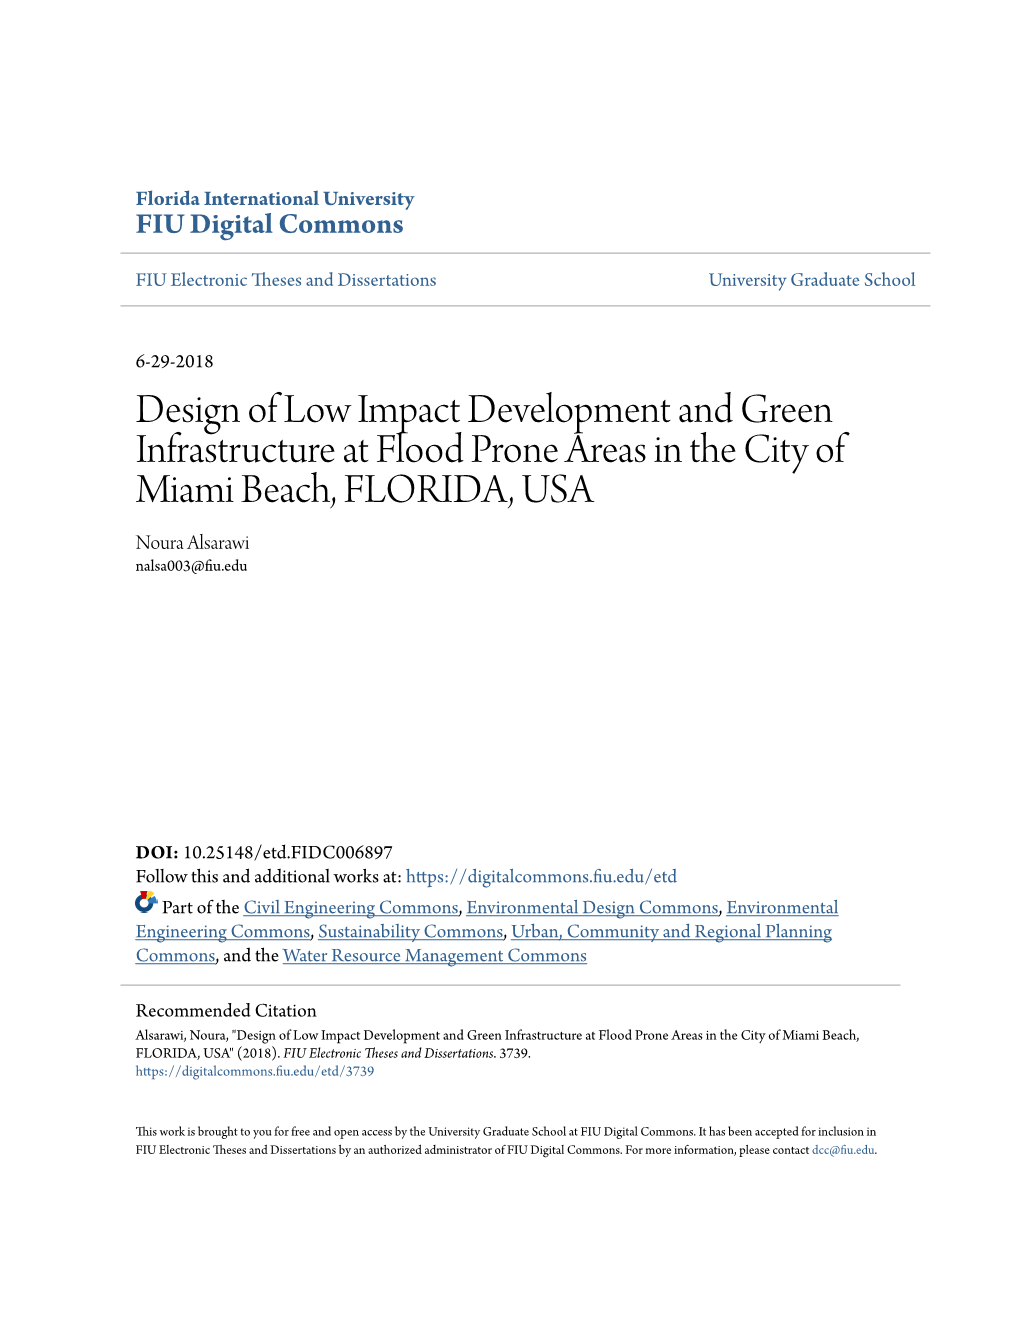 Design of Low Impact Development and Green Infrastructure at Flood Prone Areas in the City of Miami Beach, FLORIDA, USA Noura Alsarawi Nalsa003@Fiu.Edu